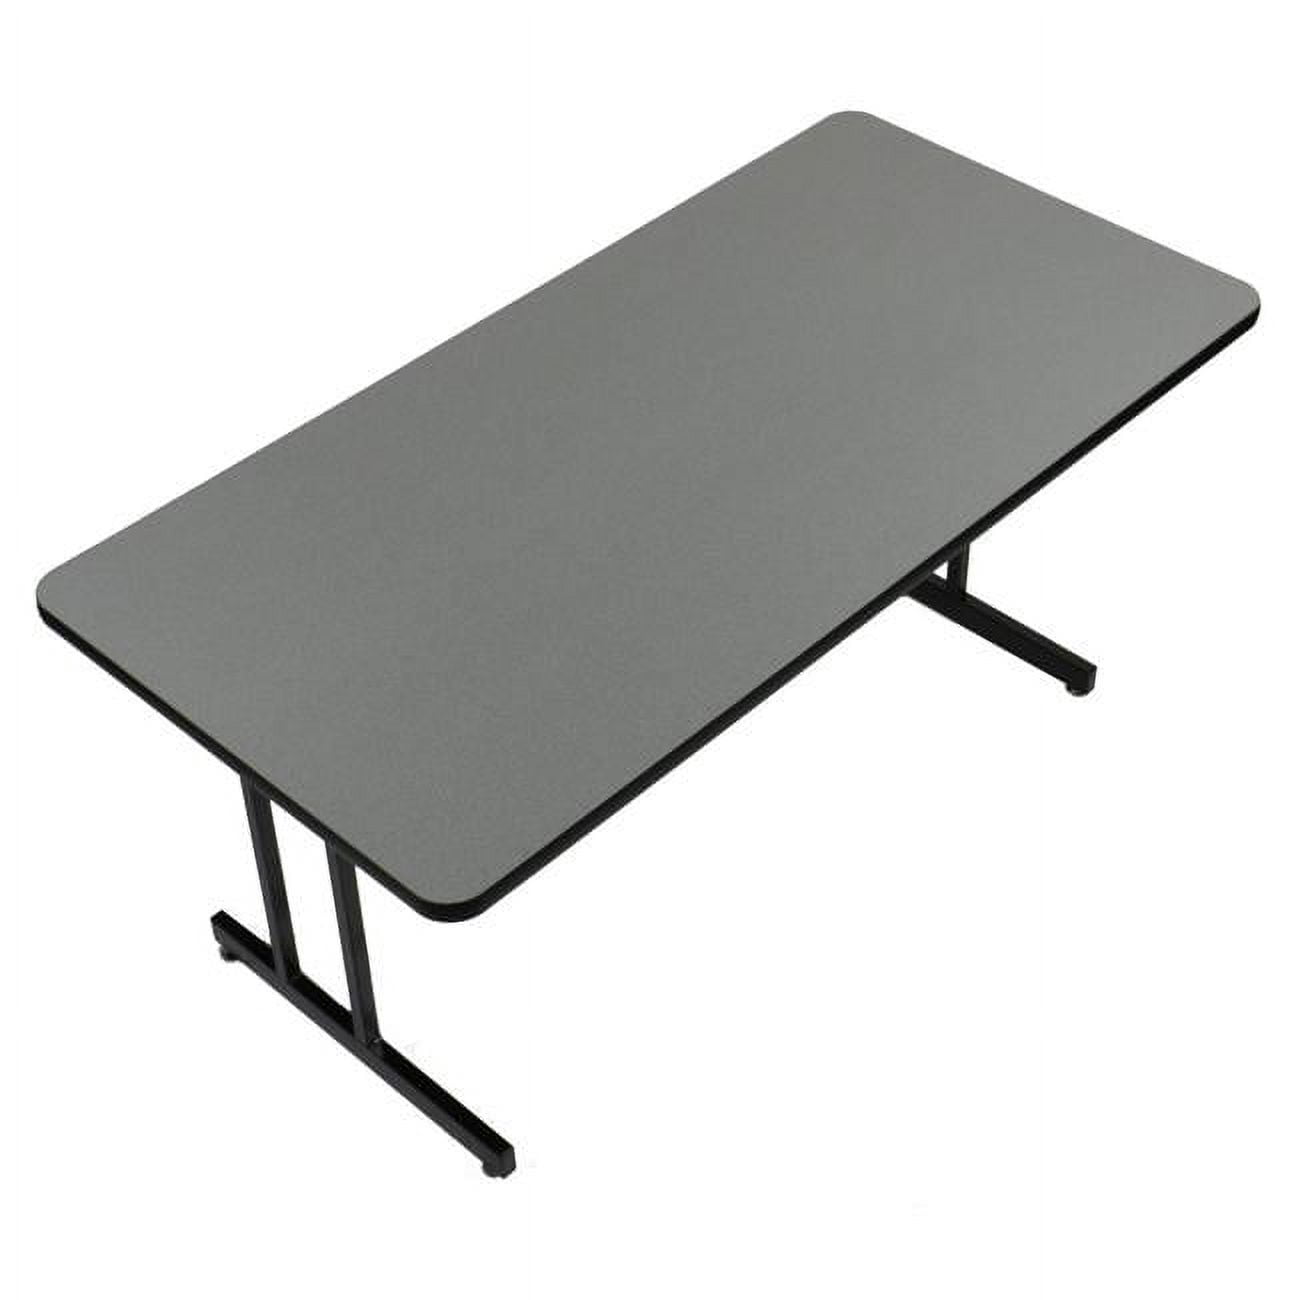 Csa3060tr-55 Adjustable Height 1.25 In. High Pressure Trapezoid Computer & Training Tables, Montana Granite - 30 X 60 In.